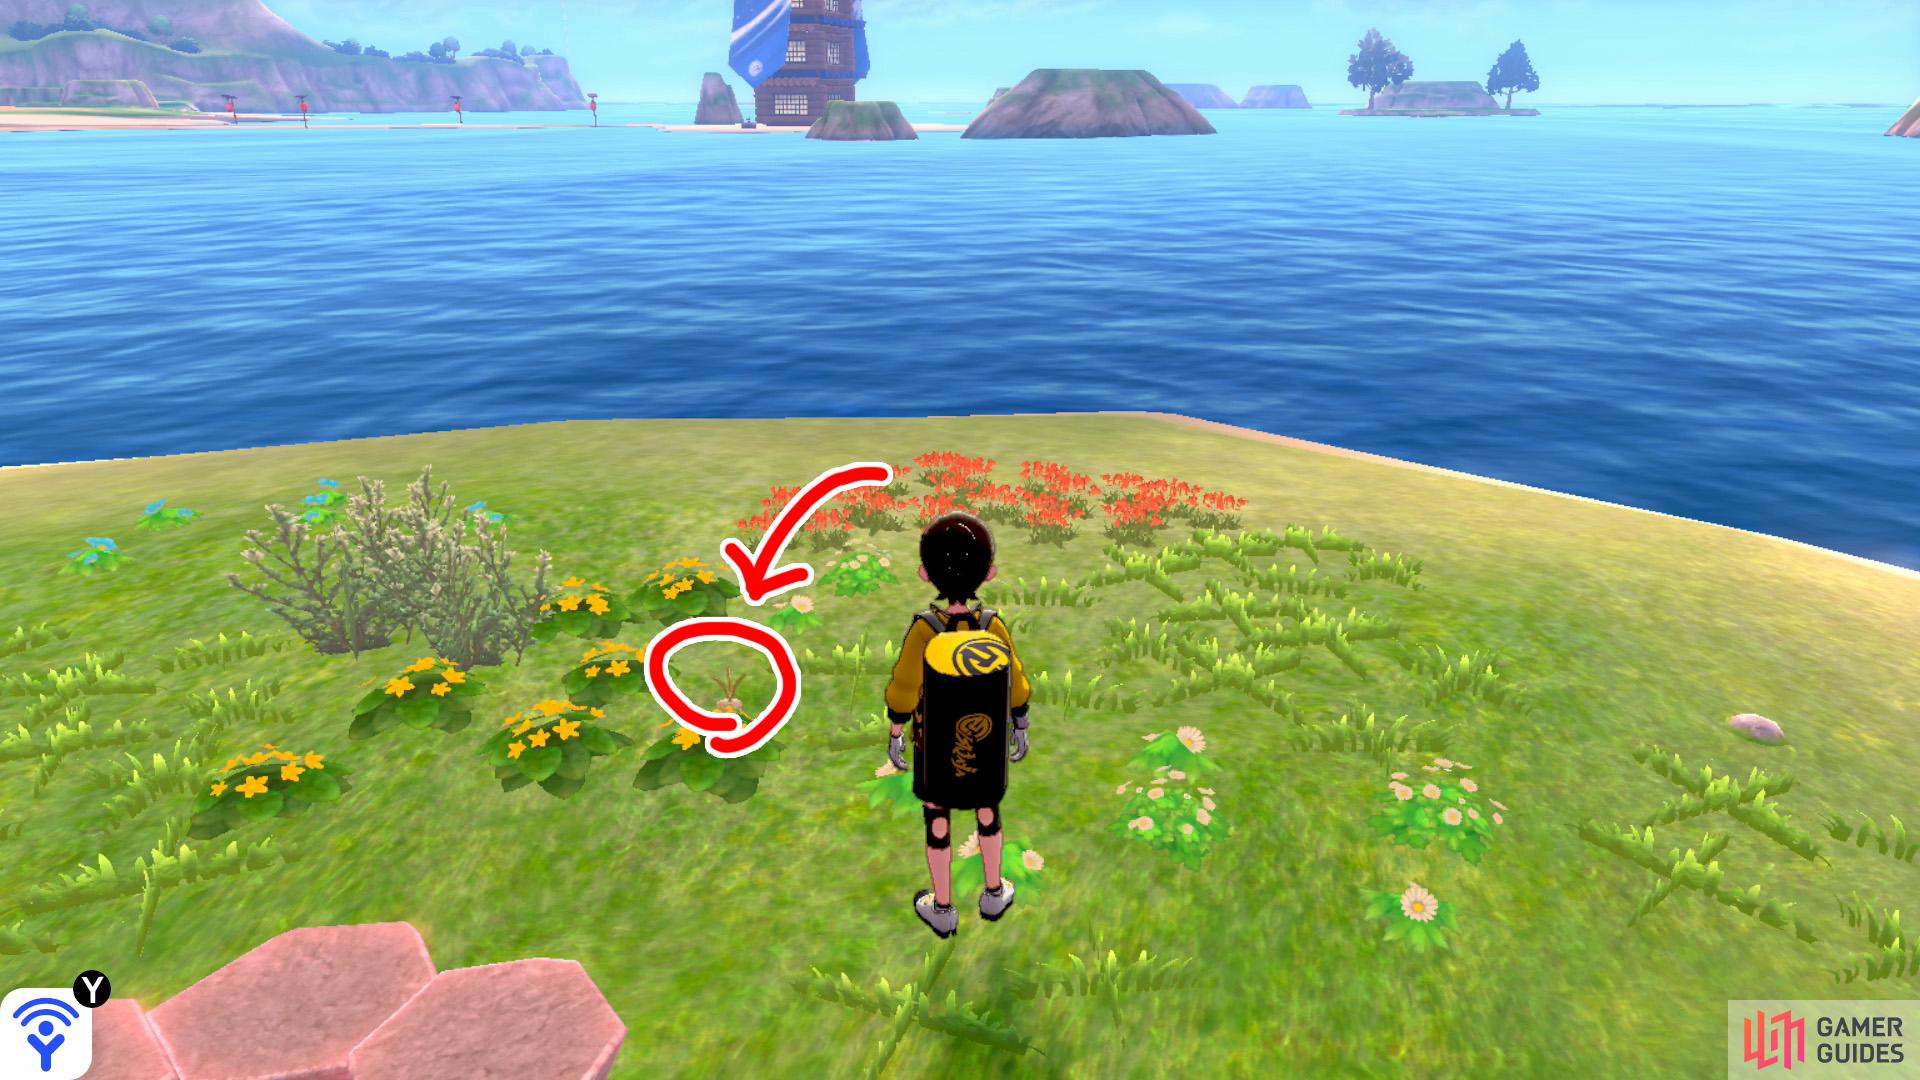 3/11: From Diglett 2, go clock-wise around the island to the second "petal". Go up to the Pokémon Den and face the Tower of Waters. It's on the right side of the yellow flowers just above the den.